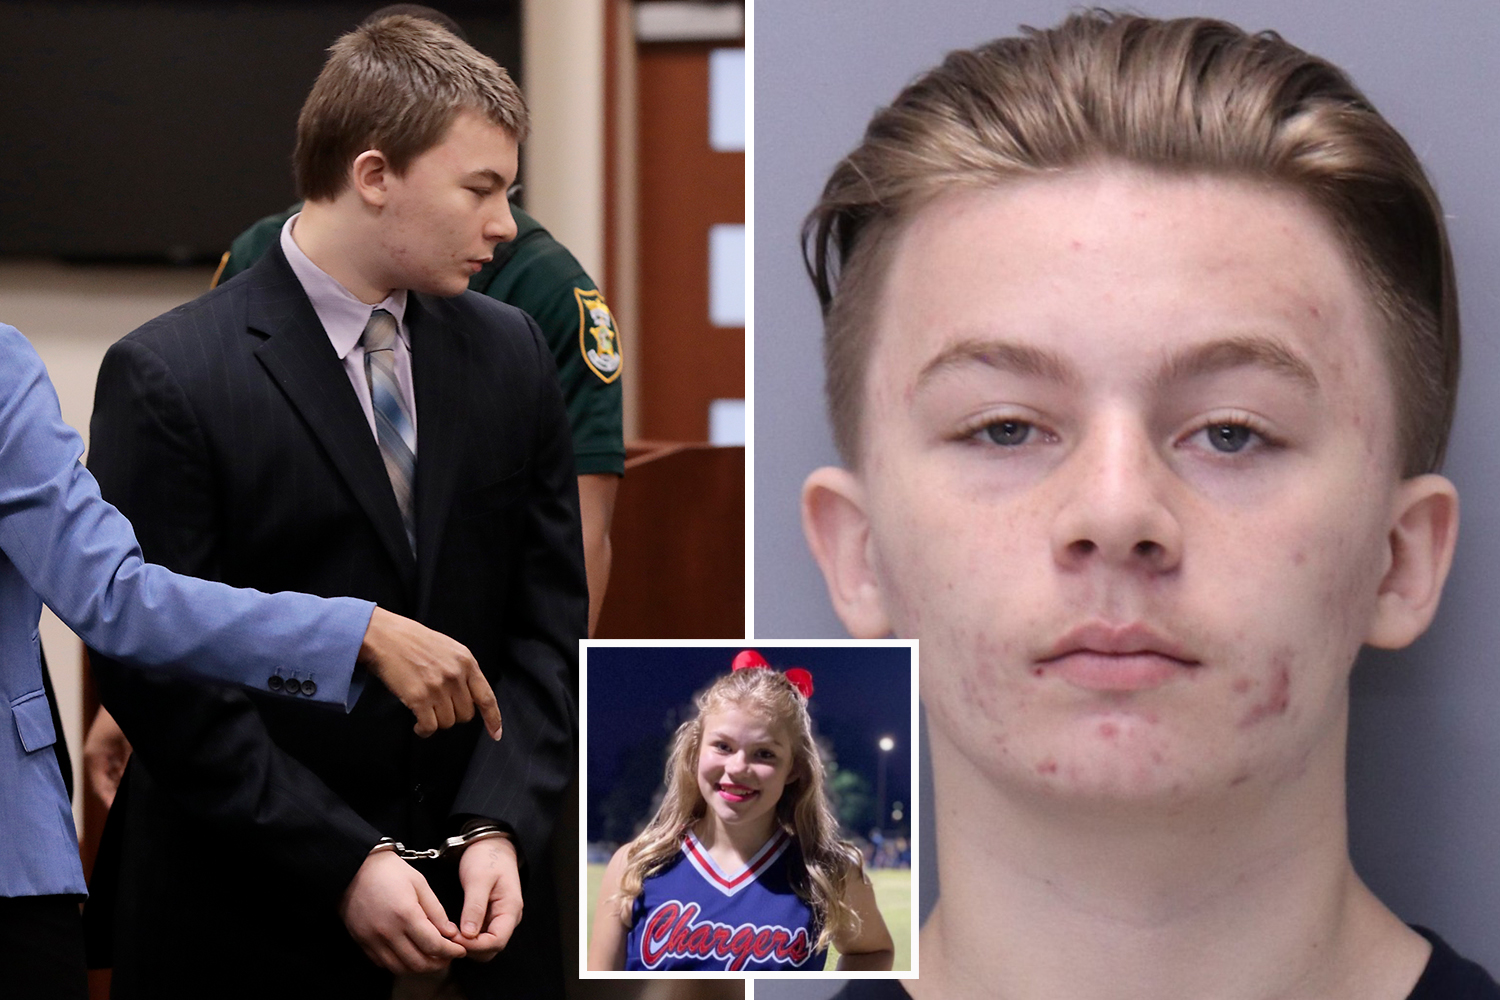 Teen pleads guilty to murdering 13-year-old cheerleader by stabbing her 114 times